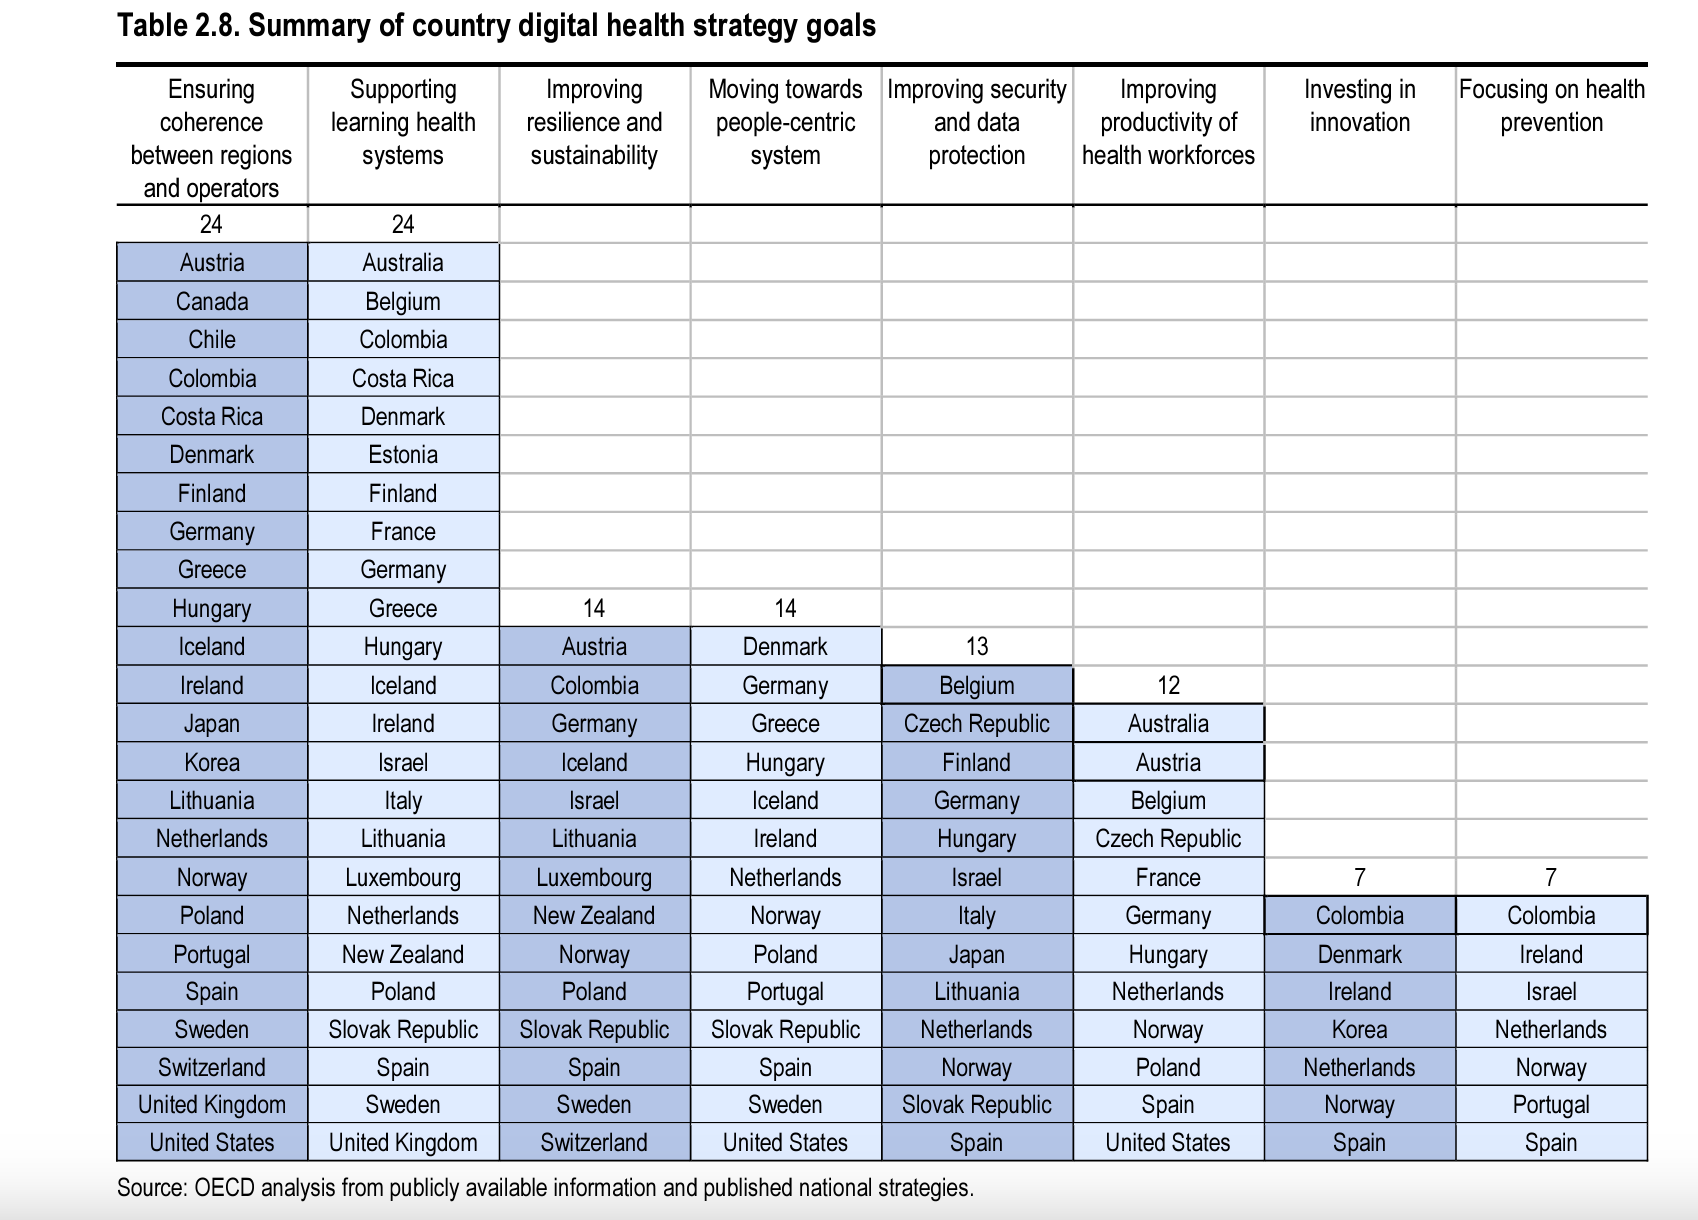 Click to enlarge

Source: OCED. 2023. Summary of country digital health strategy goals. https://www.oecd-ilibrary.org/deliver/7a7afb35-en.pdf?itemId=%2Fcontent%2Fpublication%2F7a7afb35-en&mimeType=pdf

